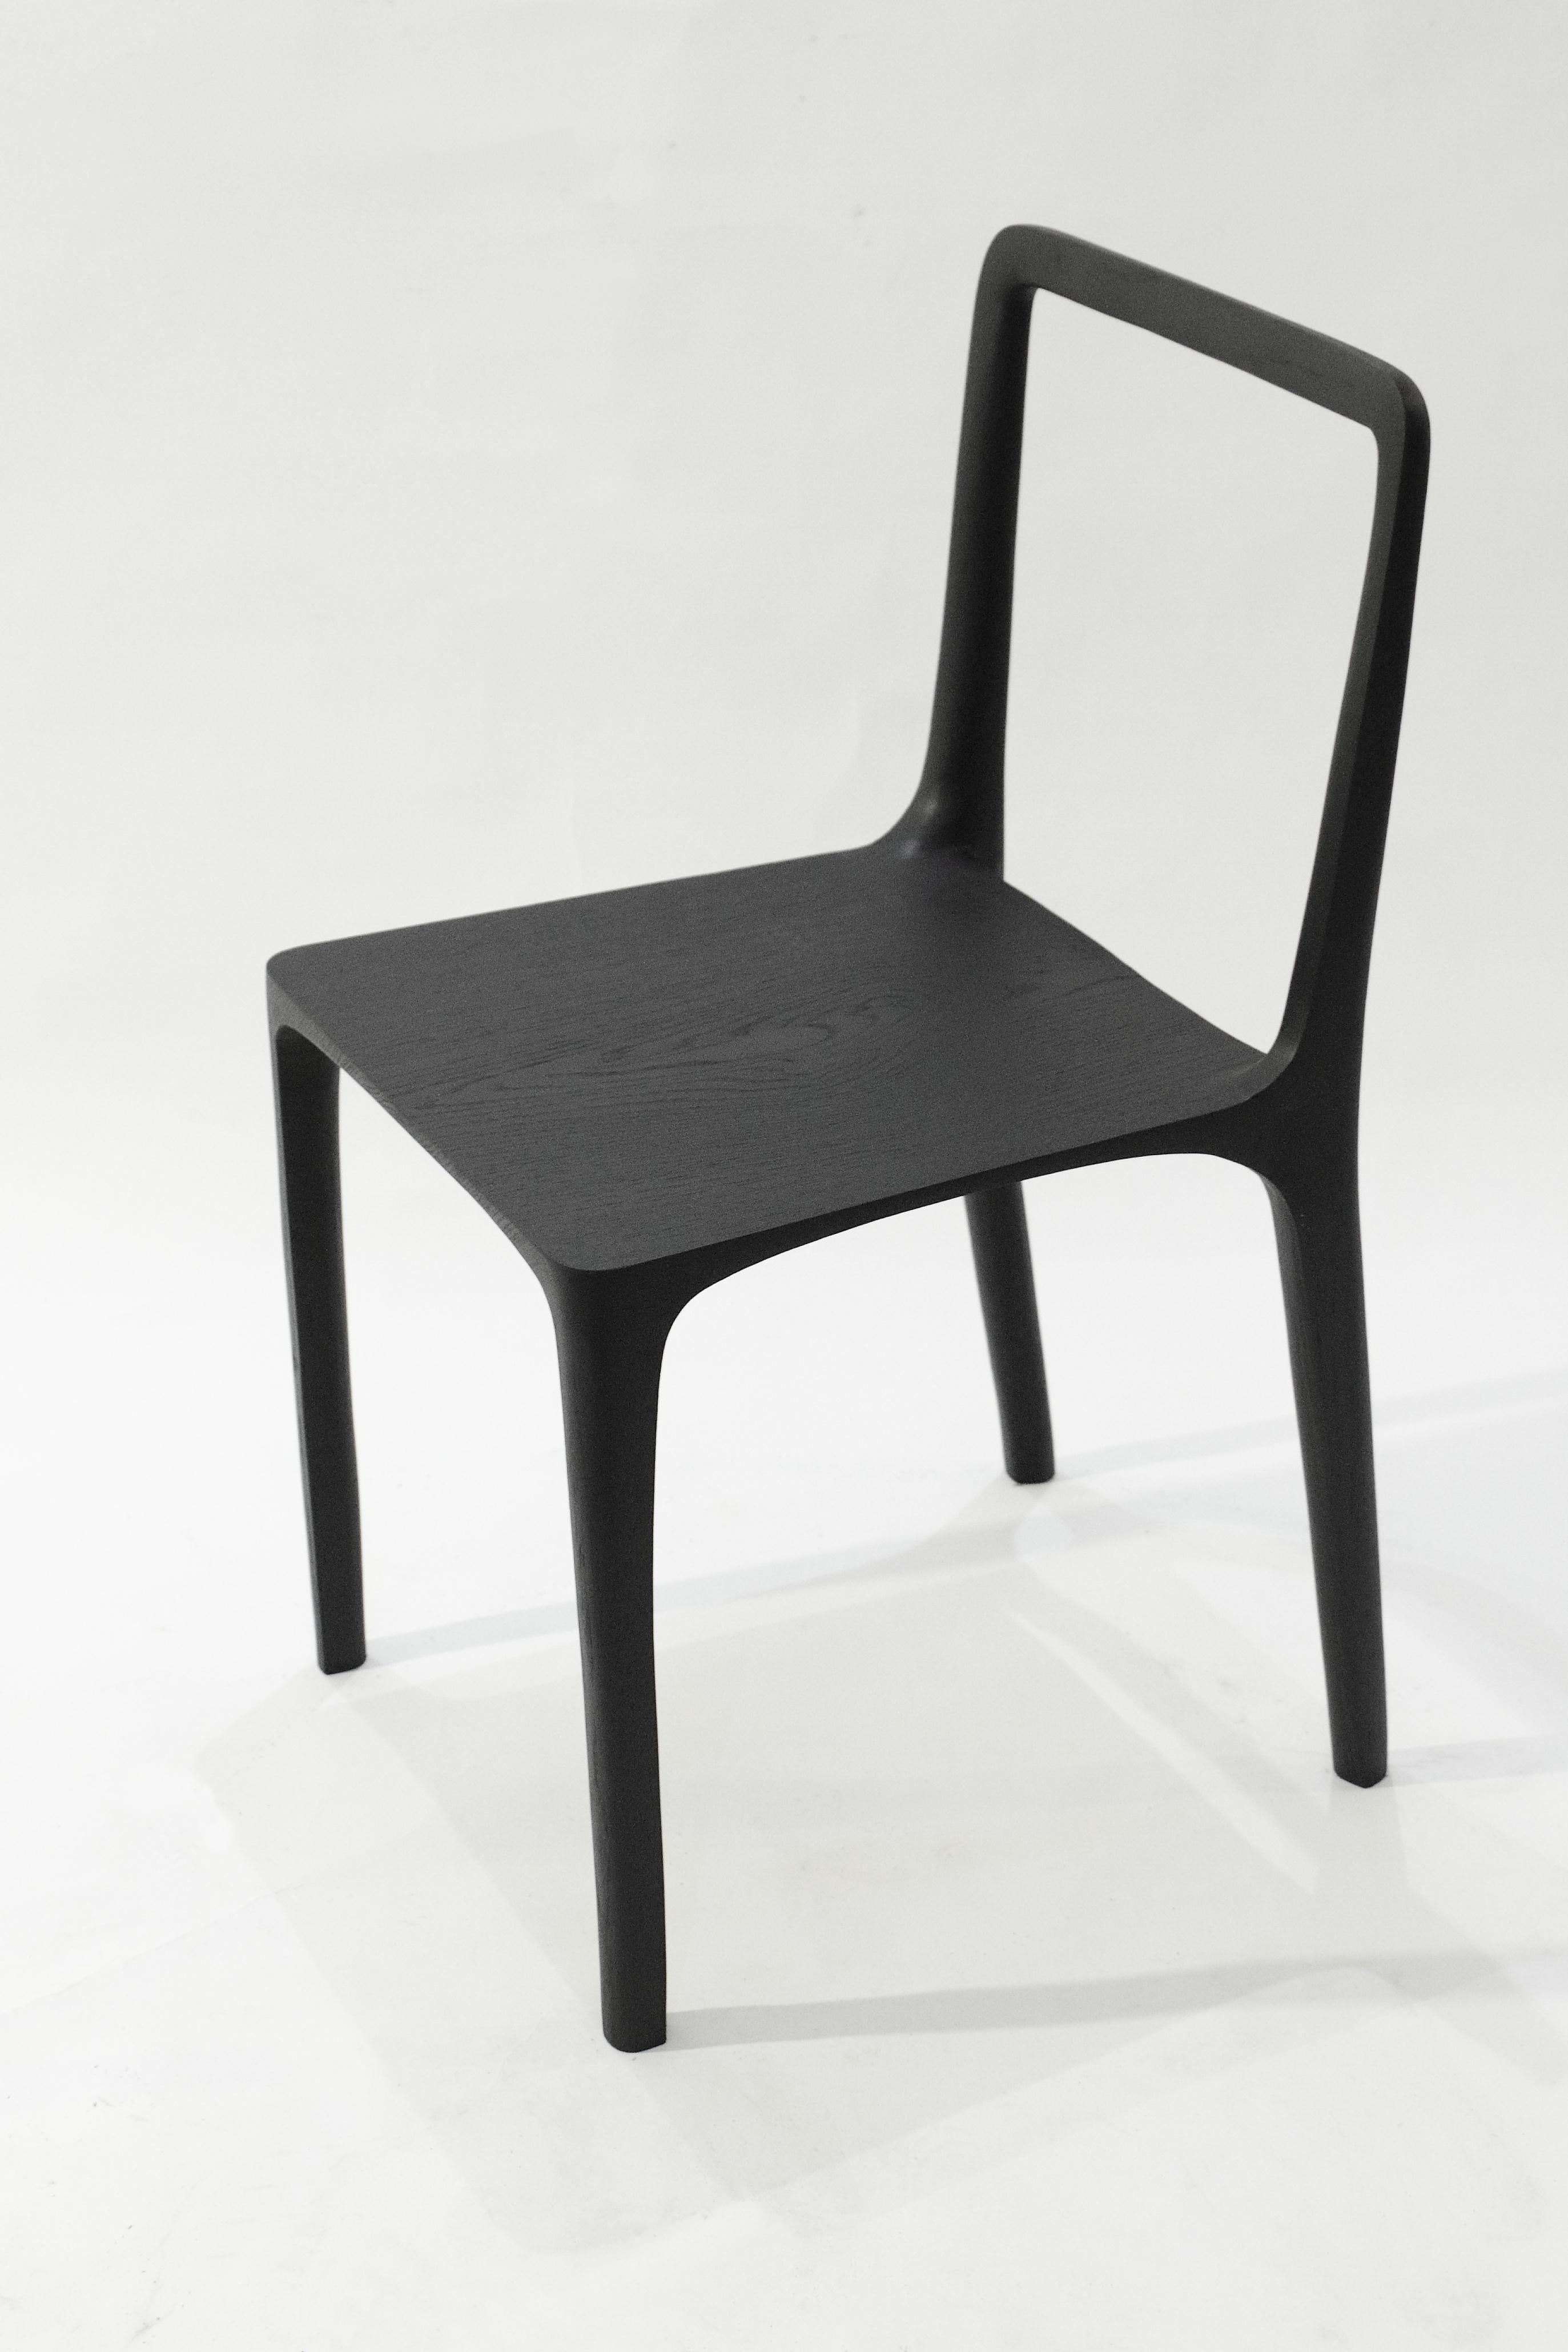 French Dot Chair, Hand-Sculpted and Signed by Cedric Breisacher